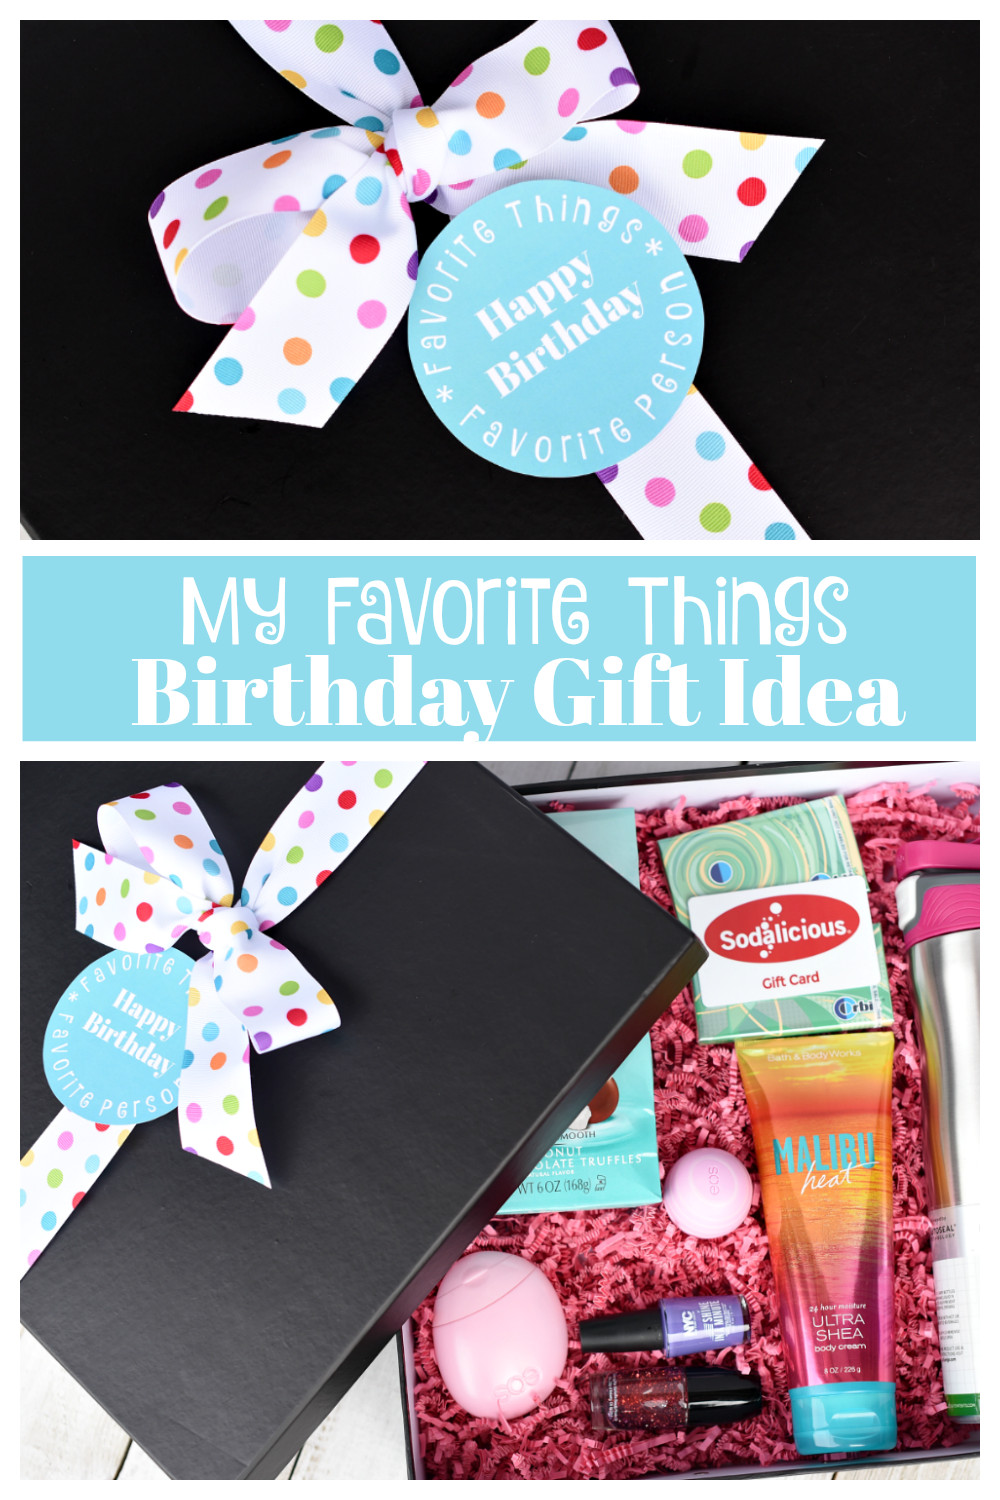 Best Gift Ideas For Best Friend
 My Favorite Things Birthday Gifts for Your Best Friend